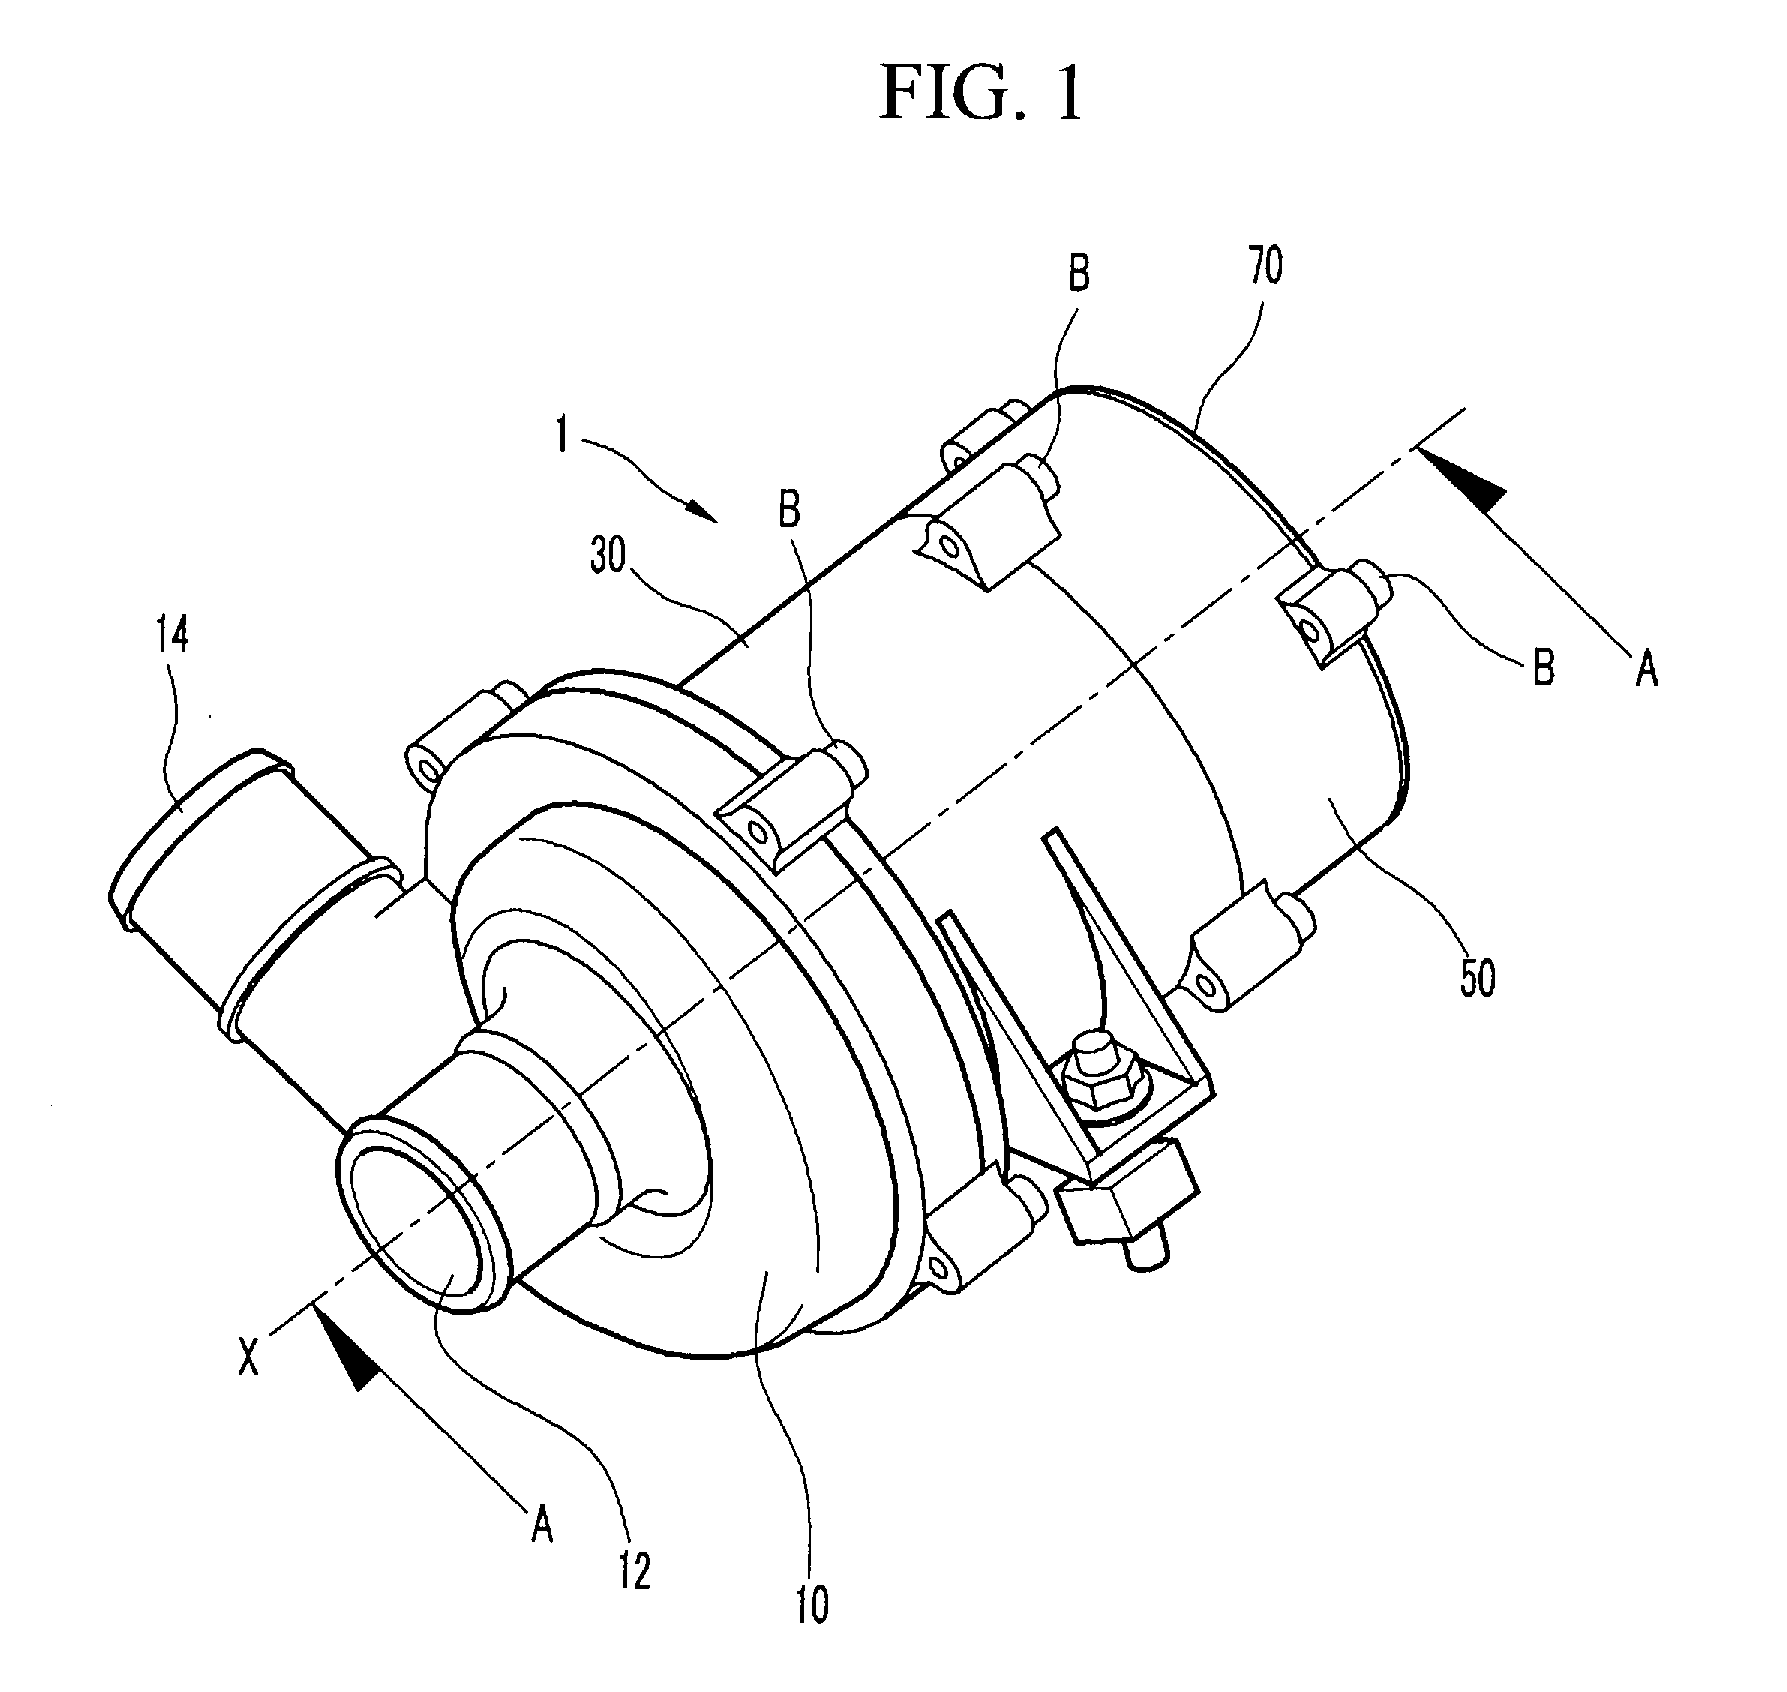 Electric Water Pump